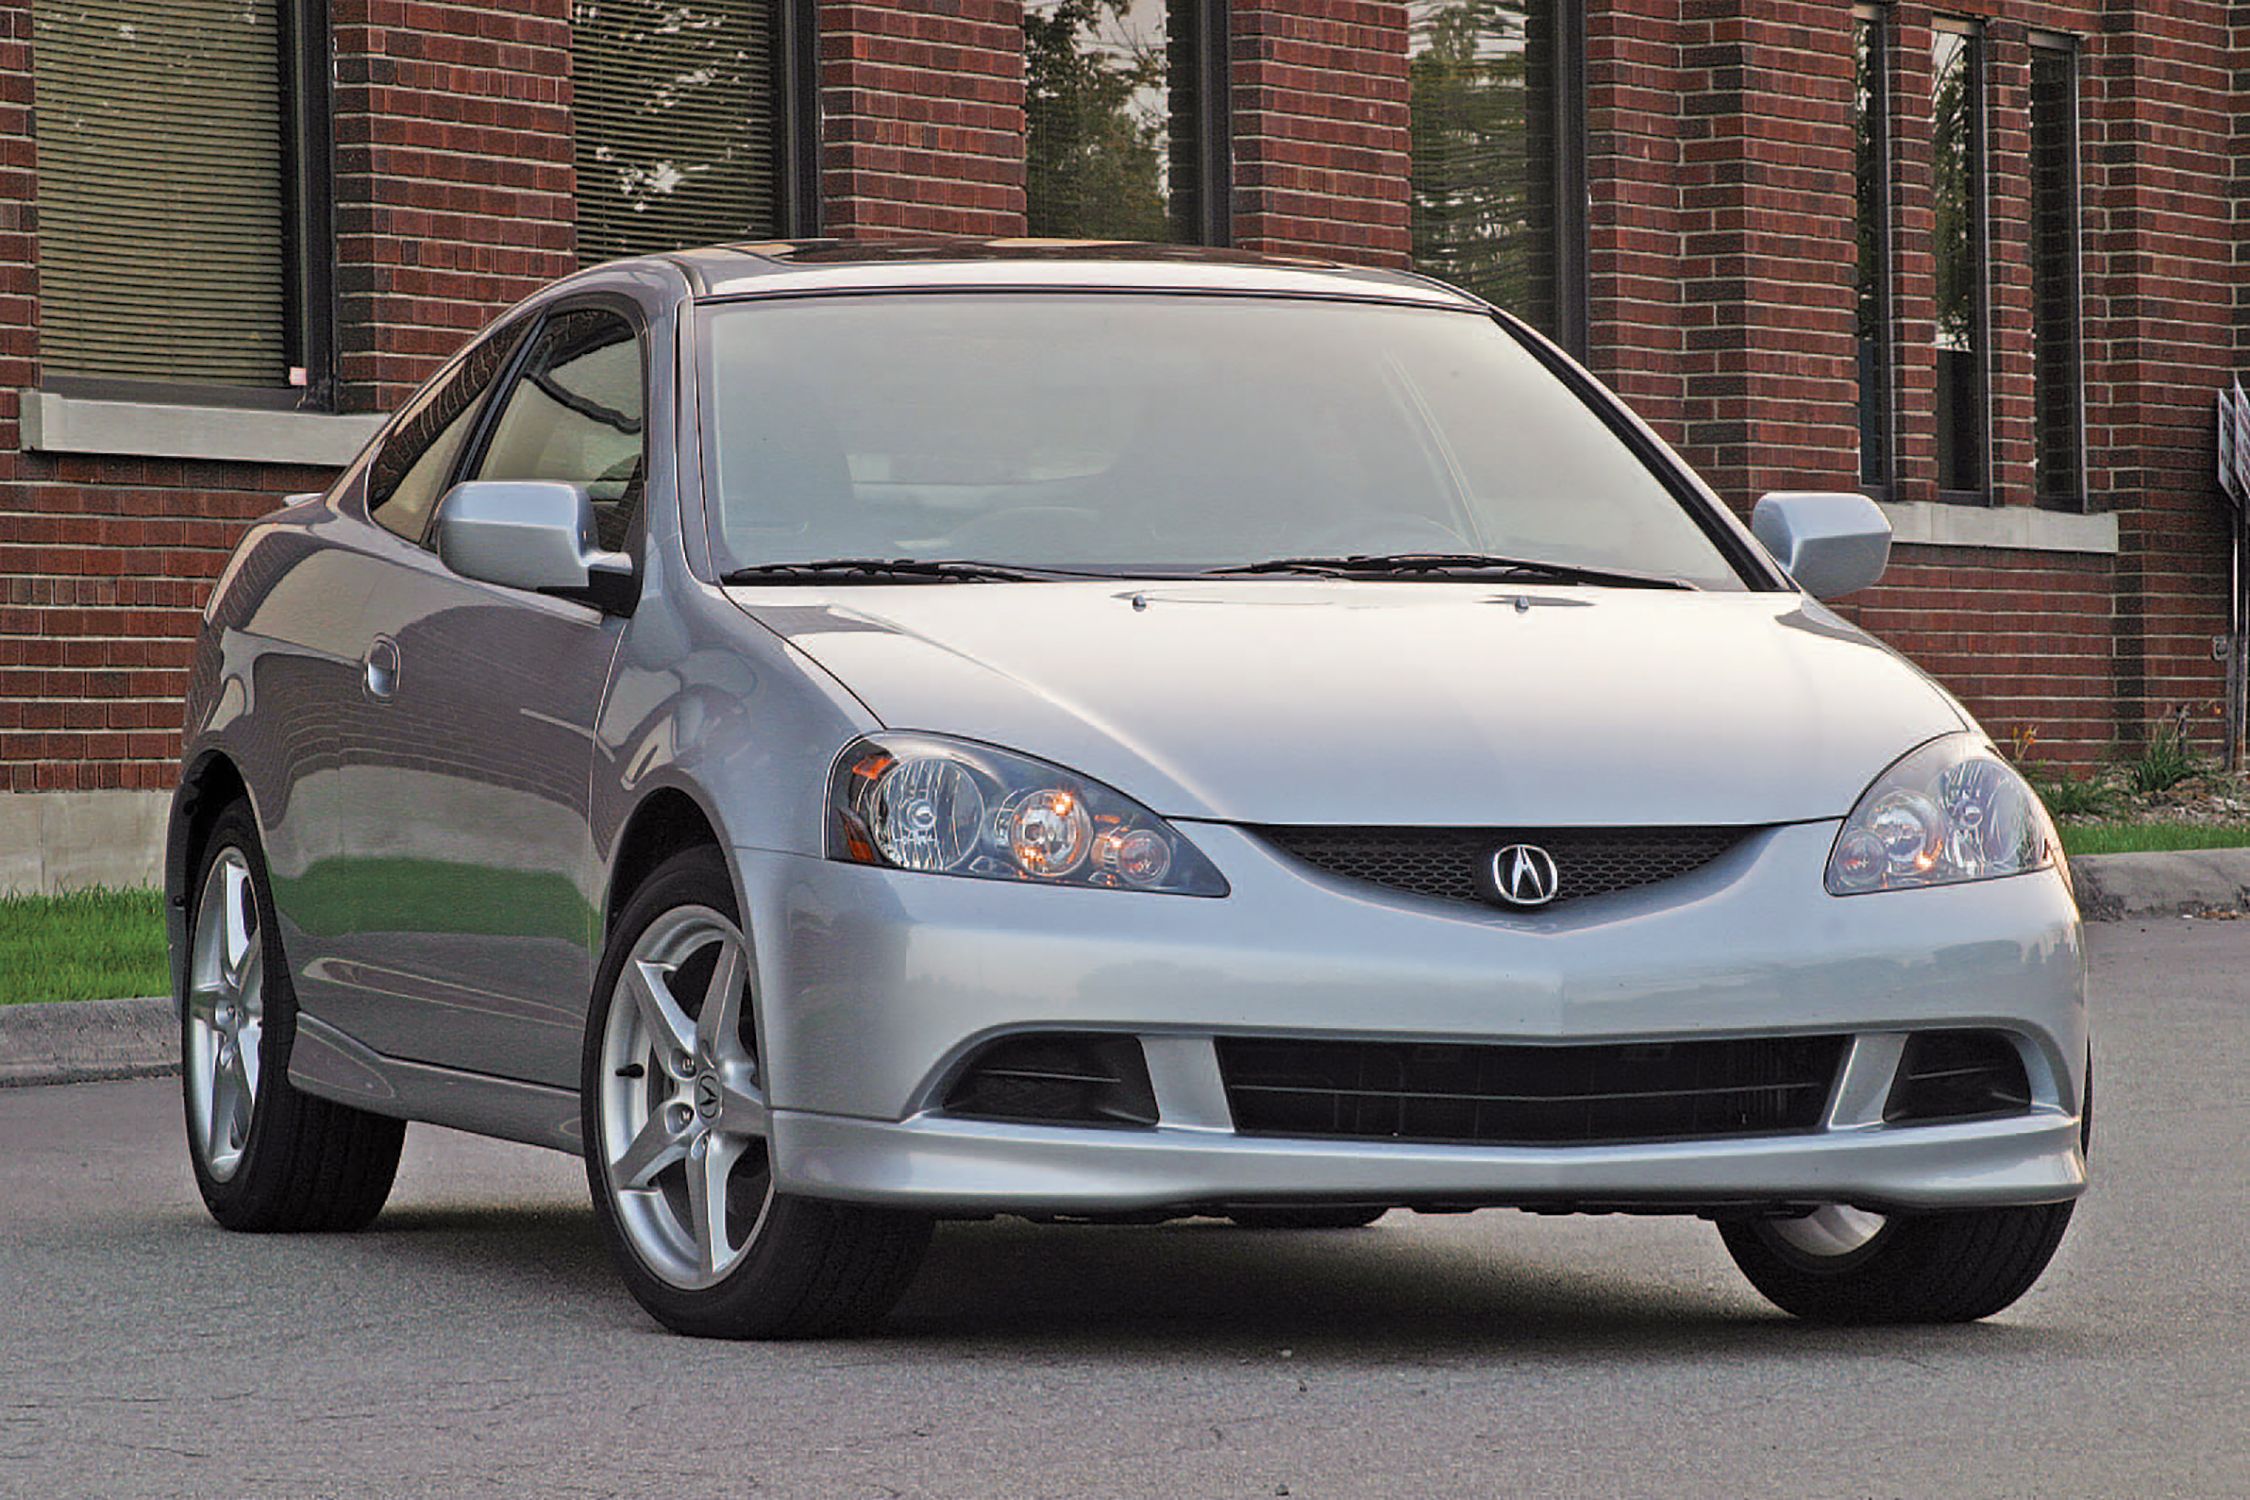 Tested: 2005 Acura RSX Type-S